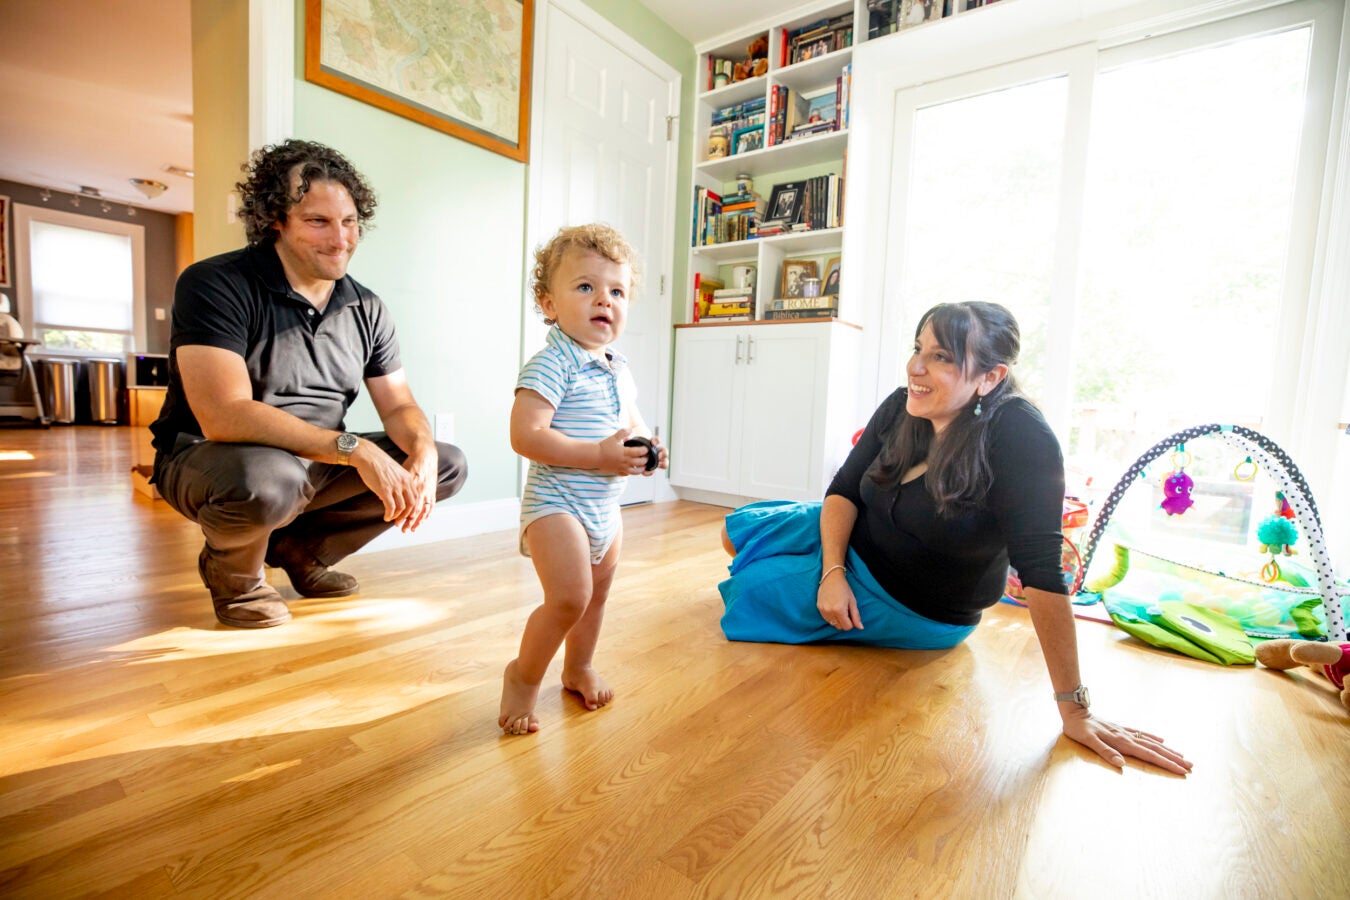 Jessica Pesce is pictured with her husband Dan Ullucci and son Antonio Ullucci in their Arlington home.